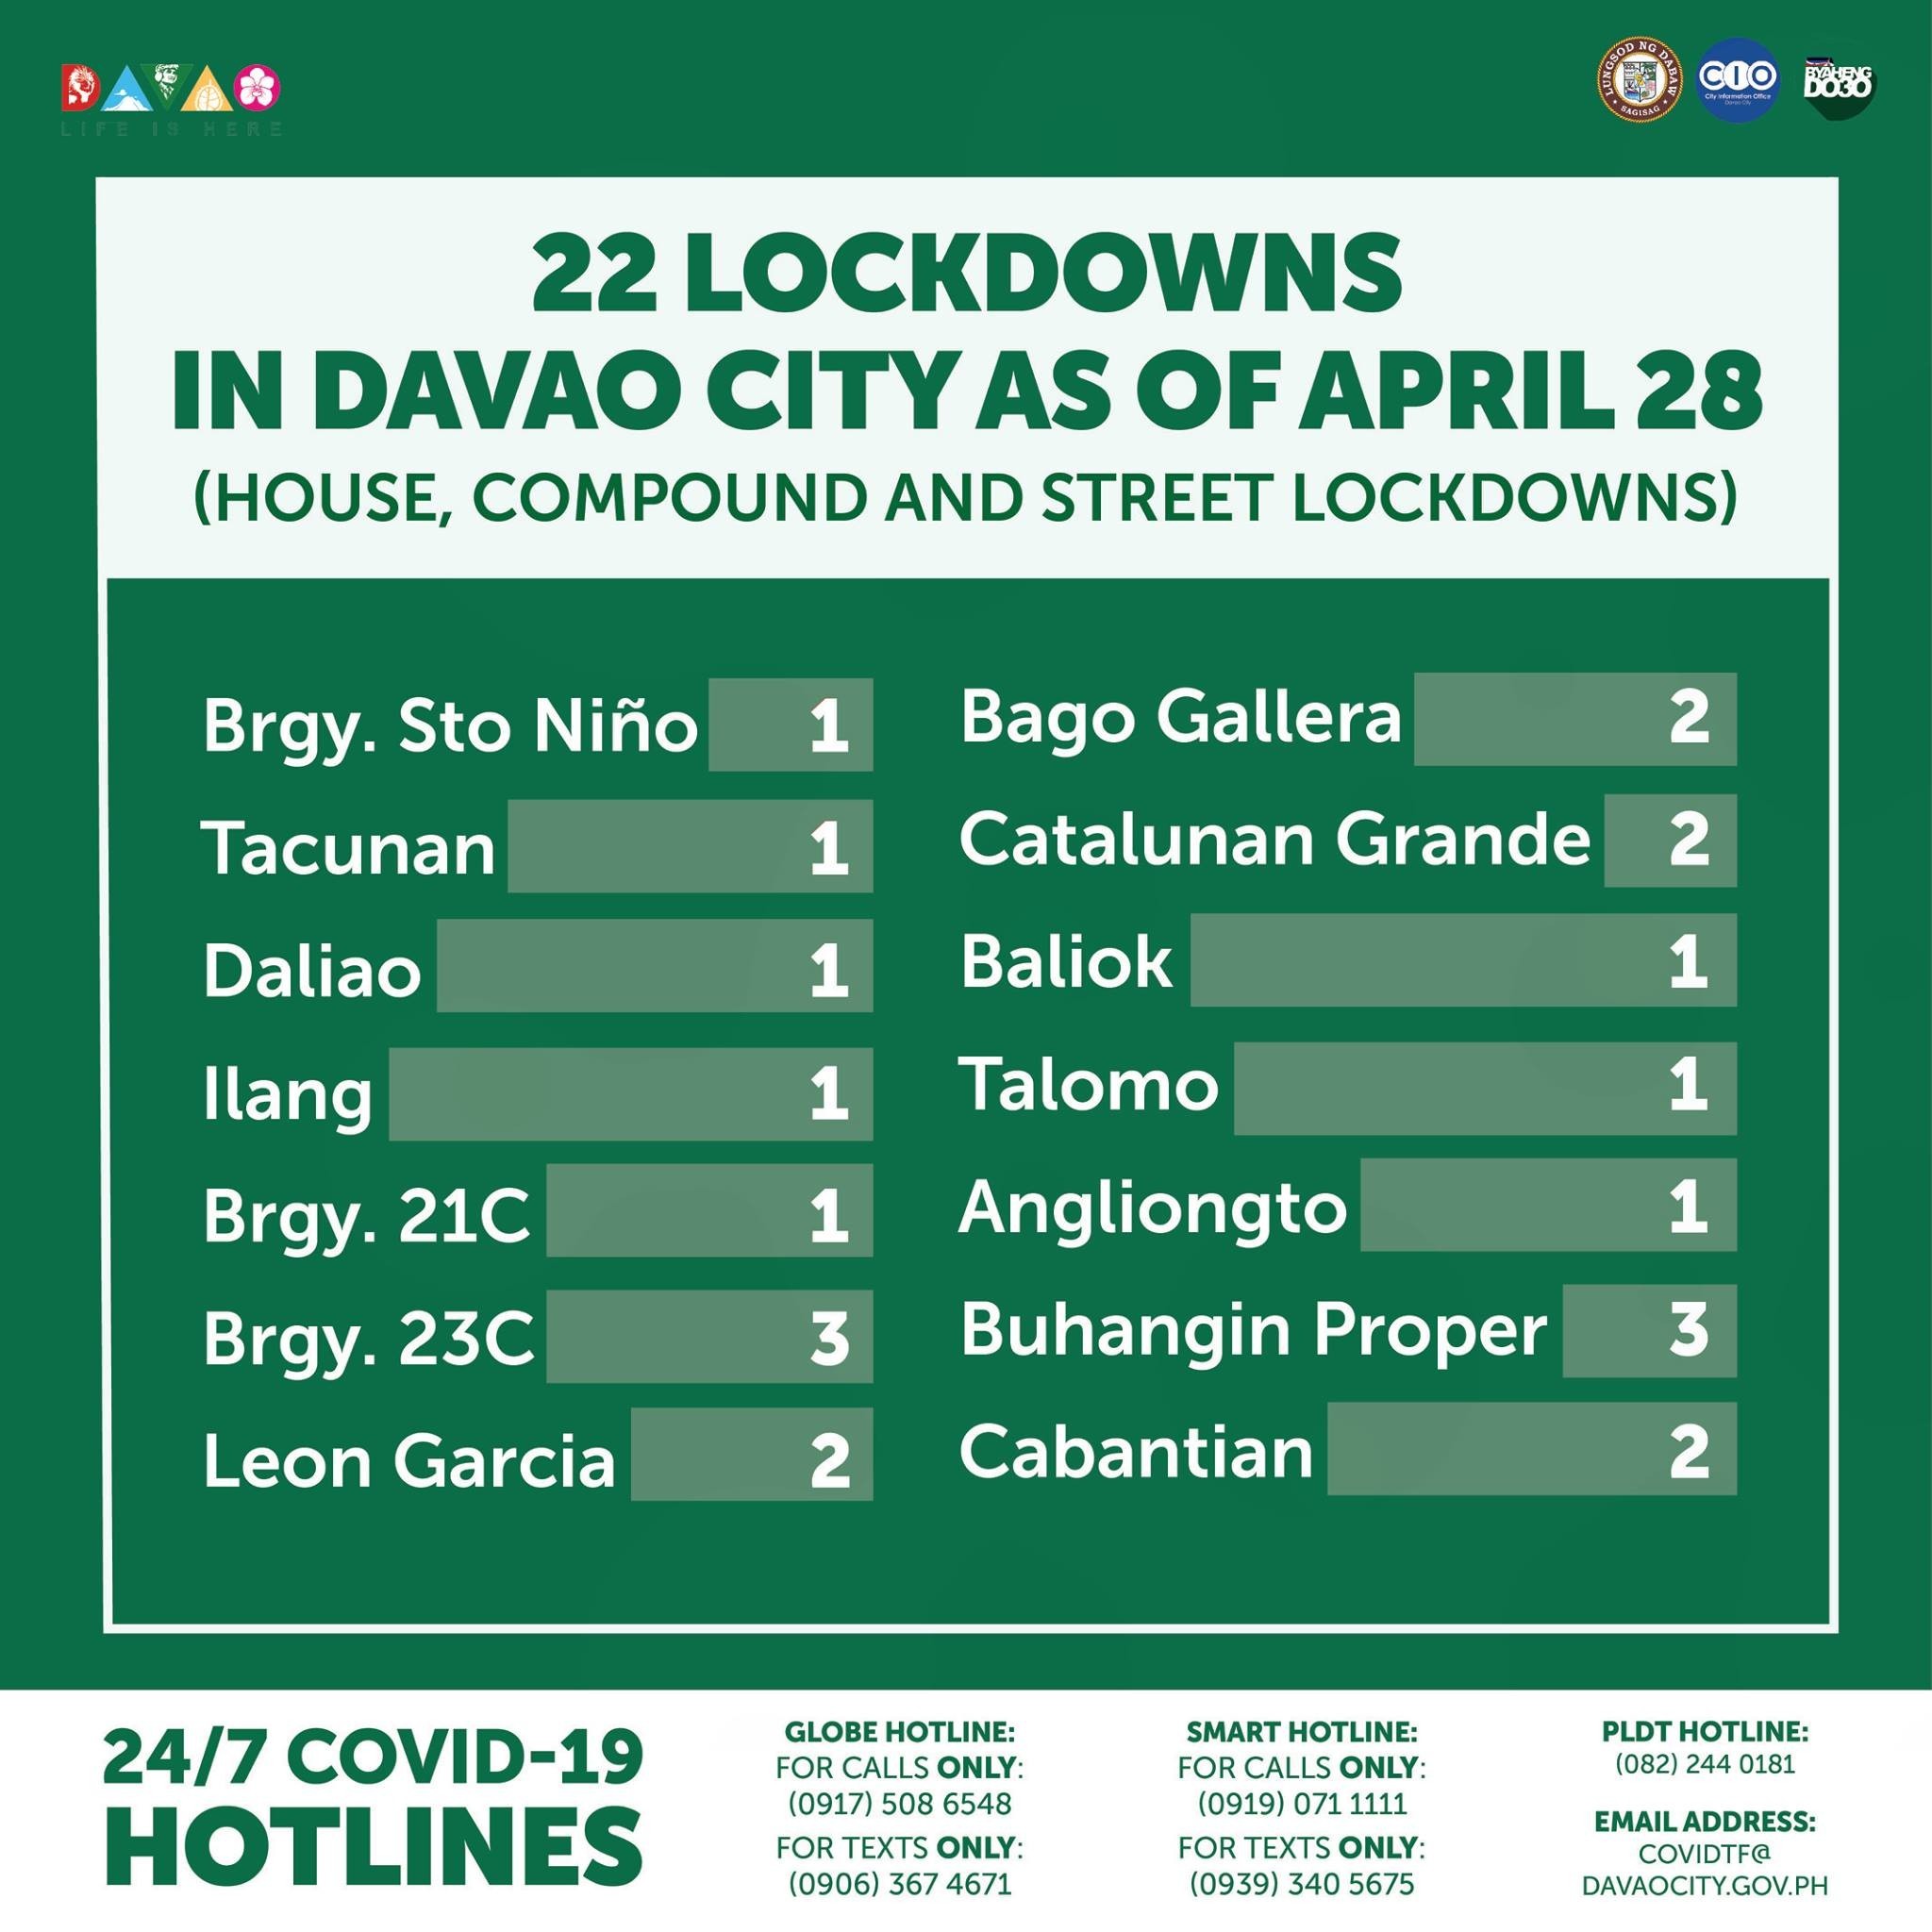 22 LOCKDOWNS IN DAVAO CITY AS OF APRIL 28 (House, compound and street lockdowns)